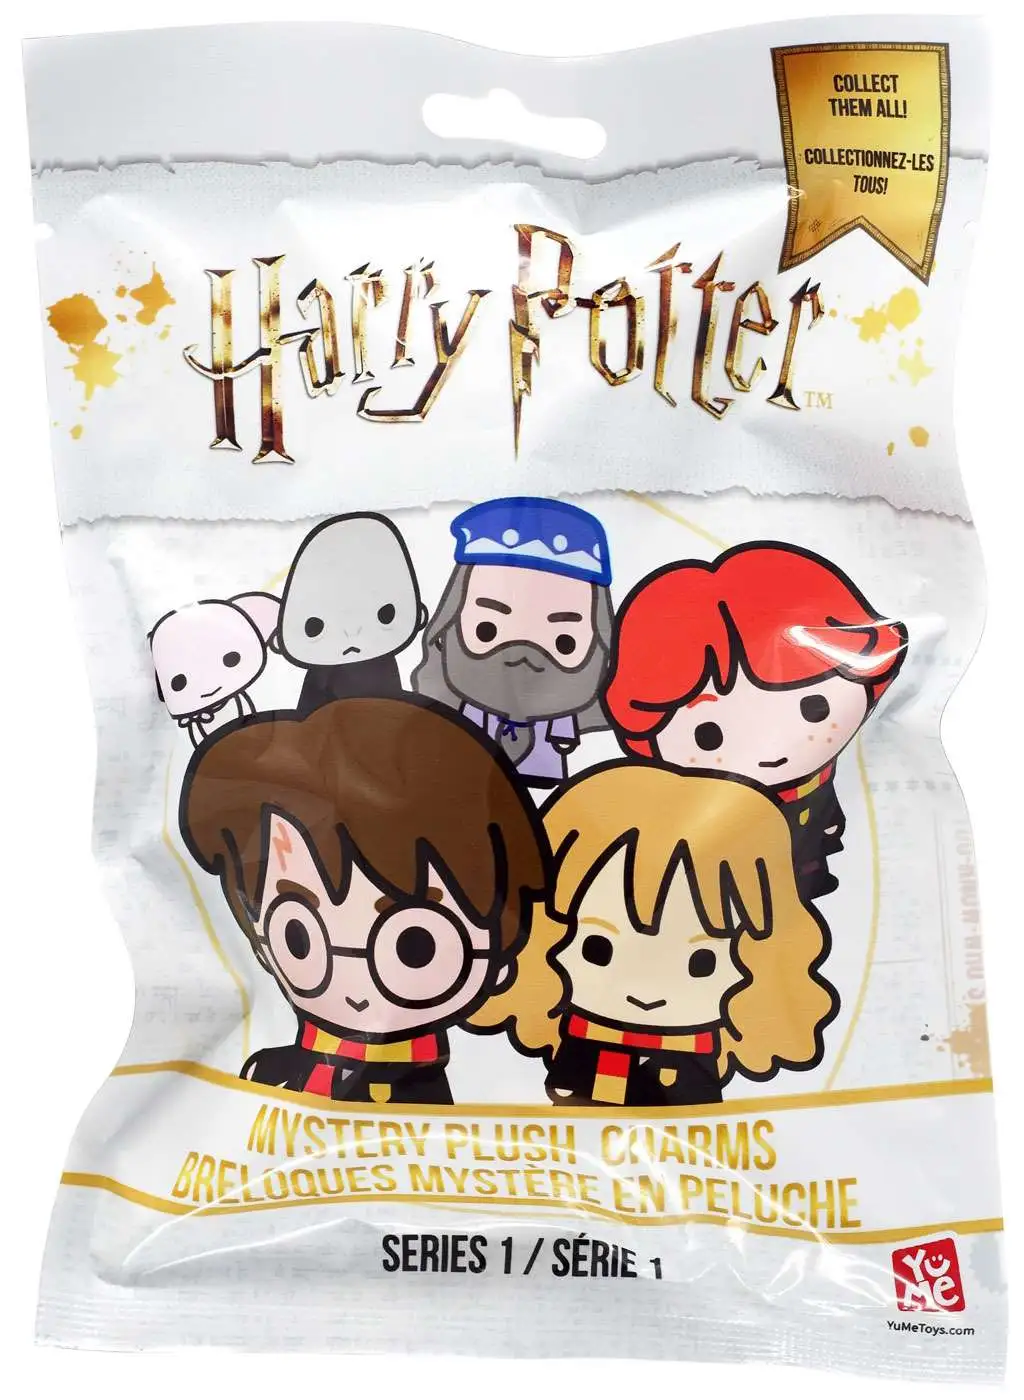 Pack 4 Charms Harry Potter 